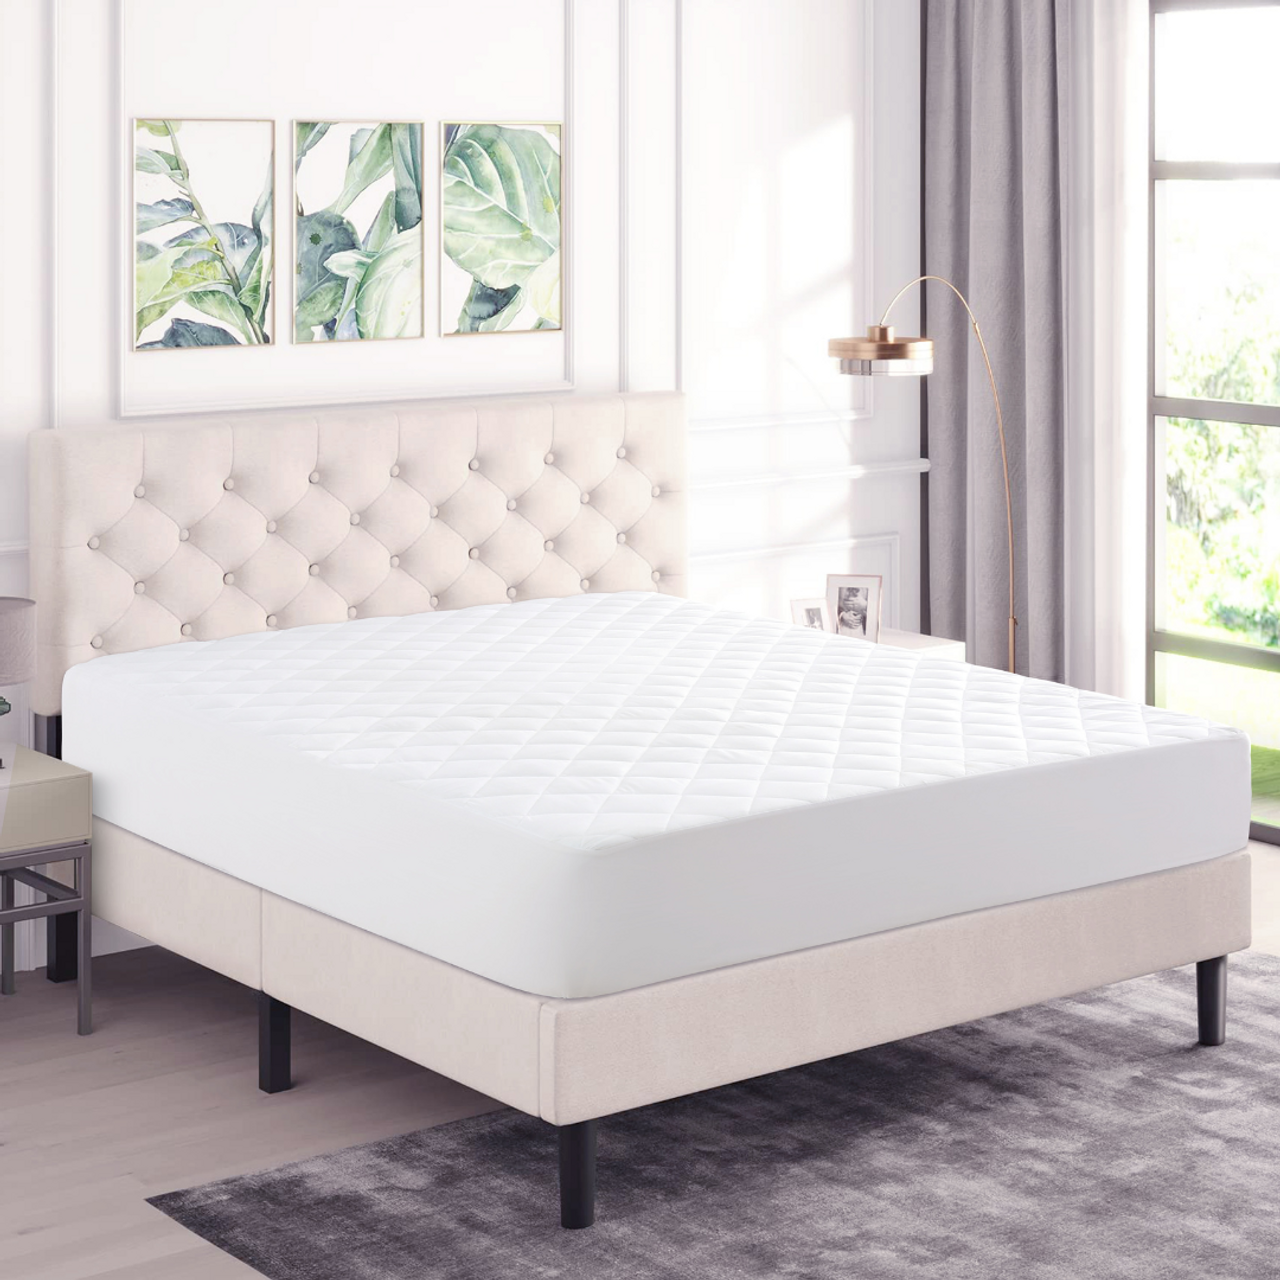 Super Soft Quilted Fitted Mattress Topper product image